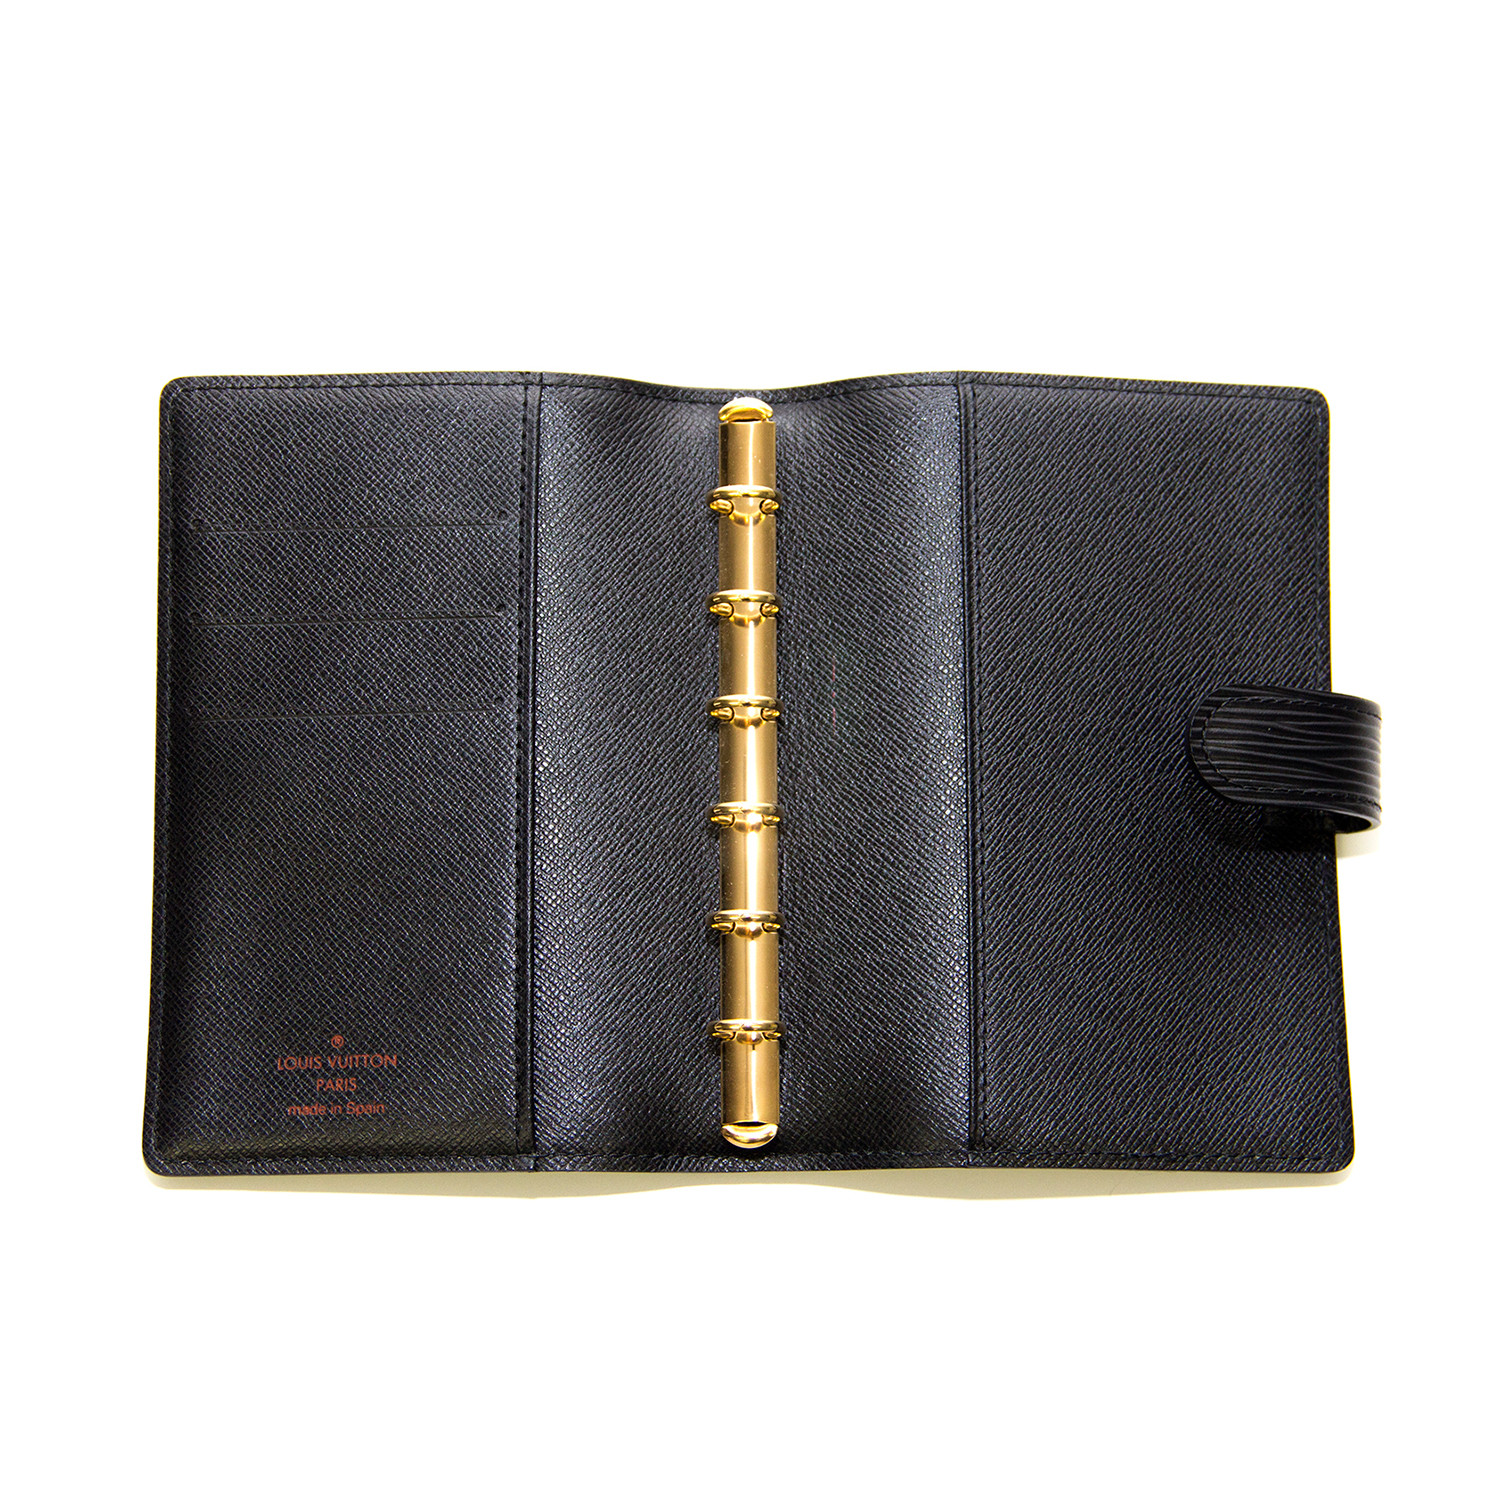 Louis Vuitton Epi Leather Small Ring Agenda Notebook PM